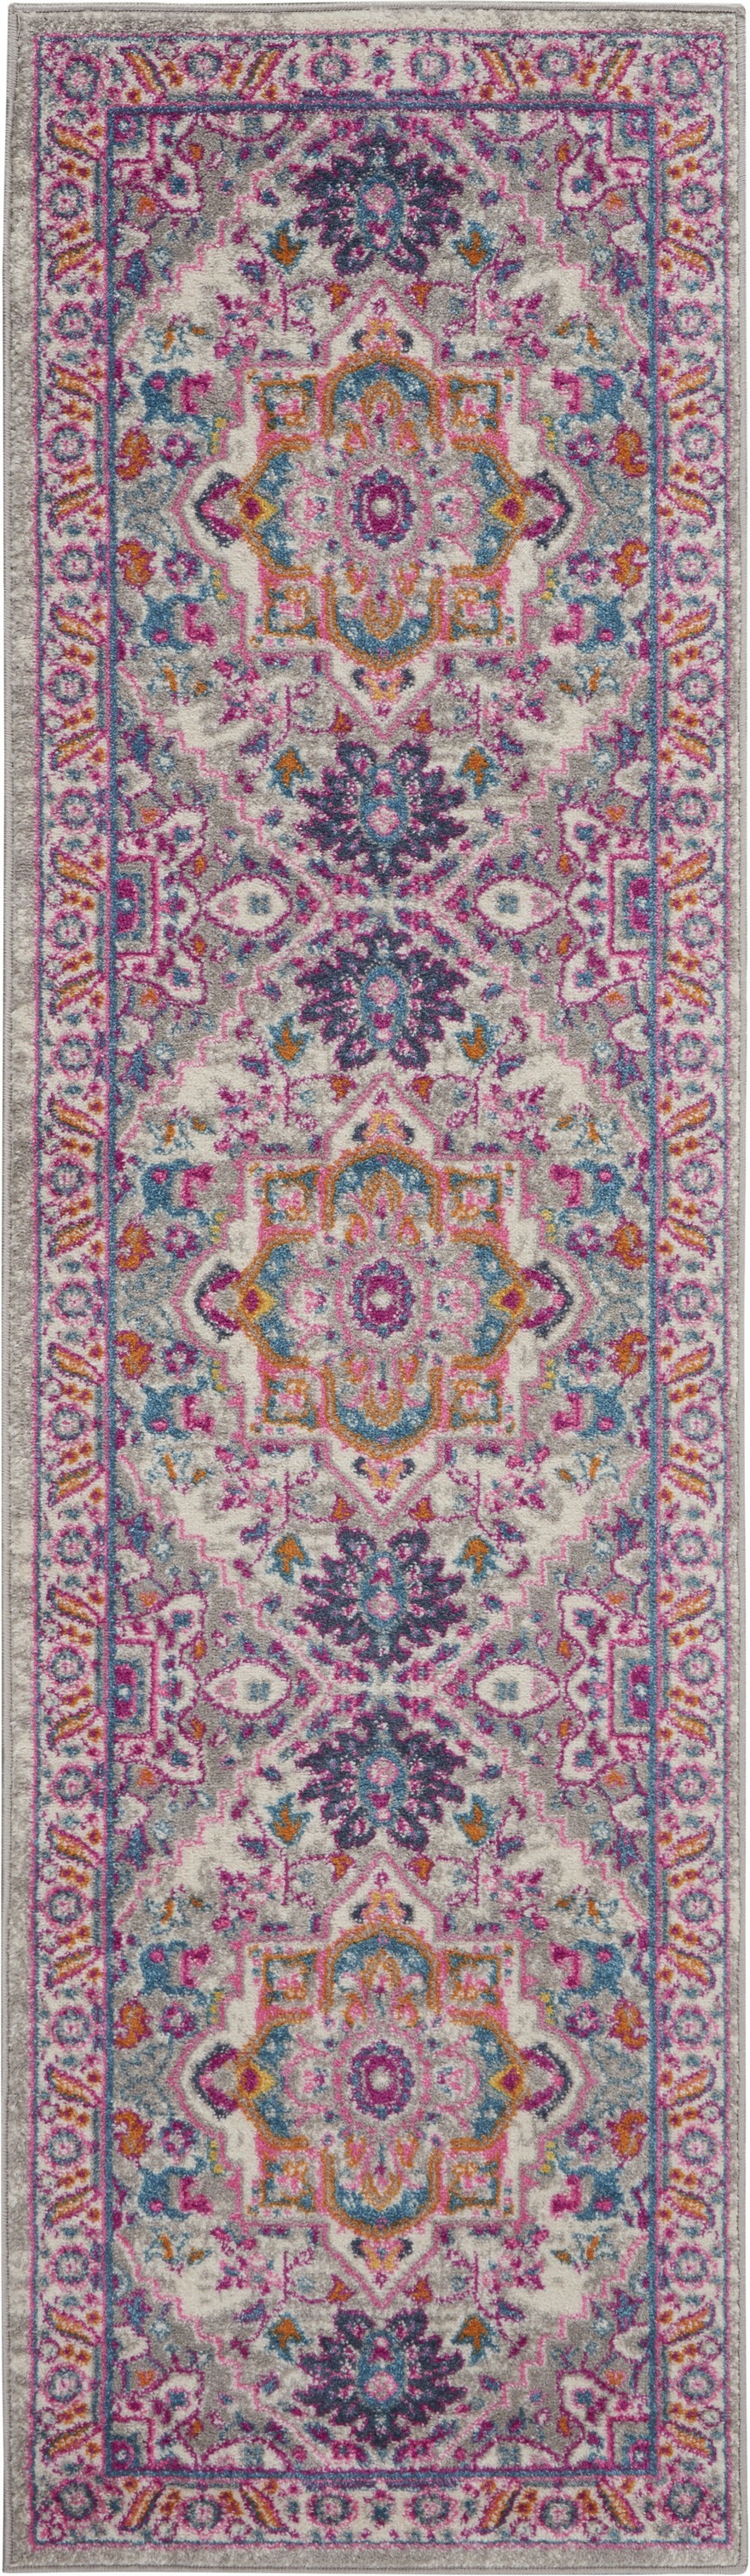 10' Pink And Gray Power Loom Runner Rug-385493-1